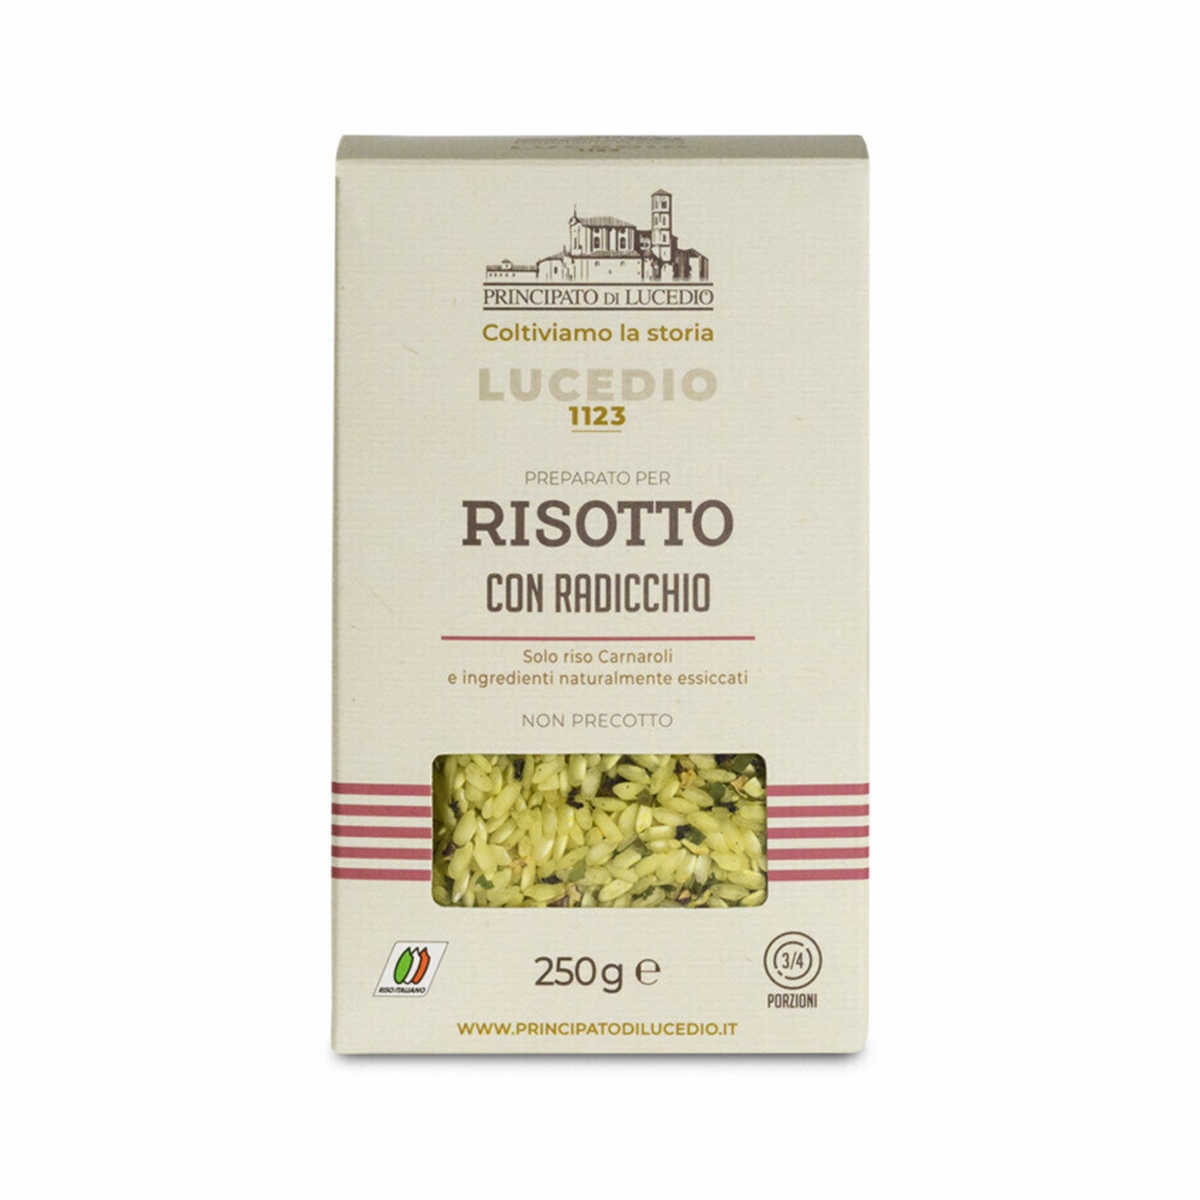 Risotto with Radicchio - 250 g - Packaged in a protective atmosphere